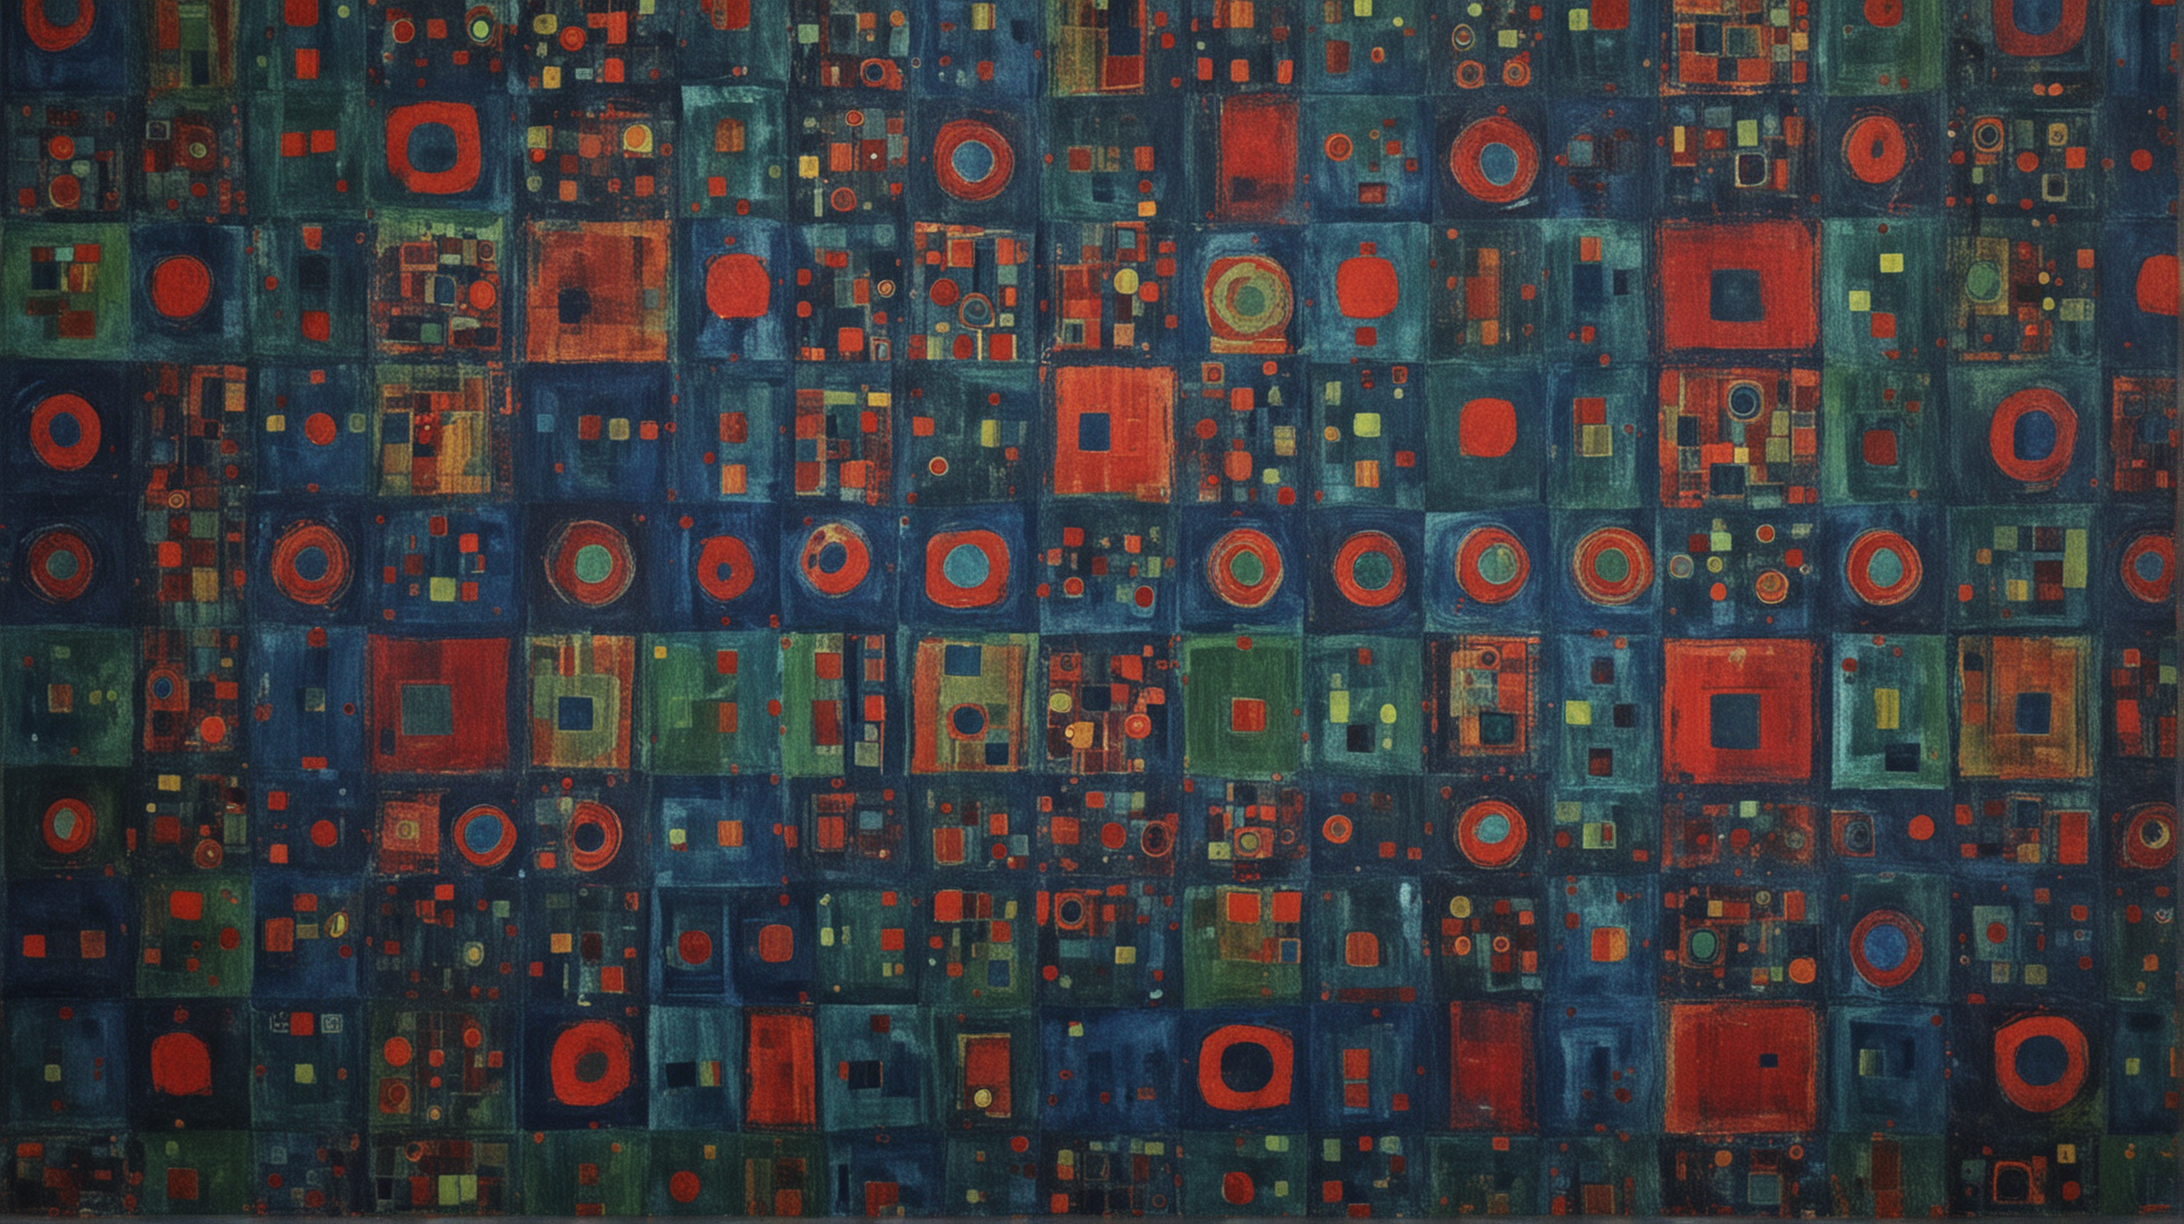 Abstract Expressionism of patterns image with no people with deep blue, deep red and some green with squares and circles.
.